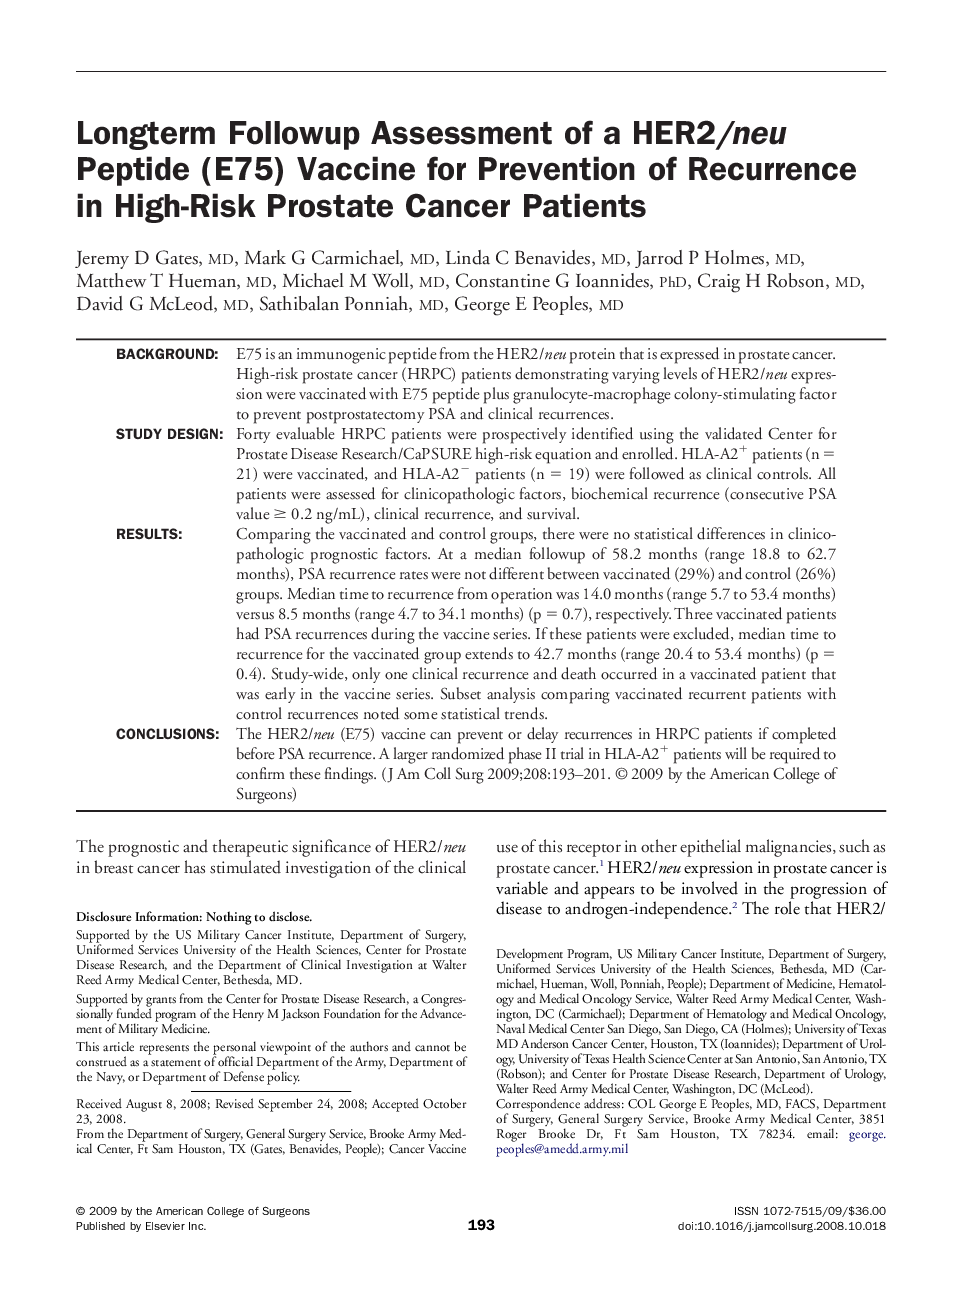 Longterm Followup Assessment of a HER2/neu Peptide (E75) Vaccine for Prevention of Recurrence in High-Risk Prostate Cancer Patients 